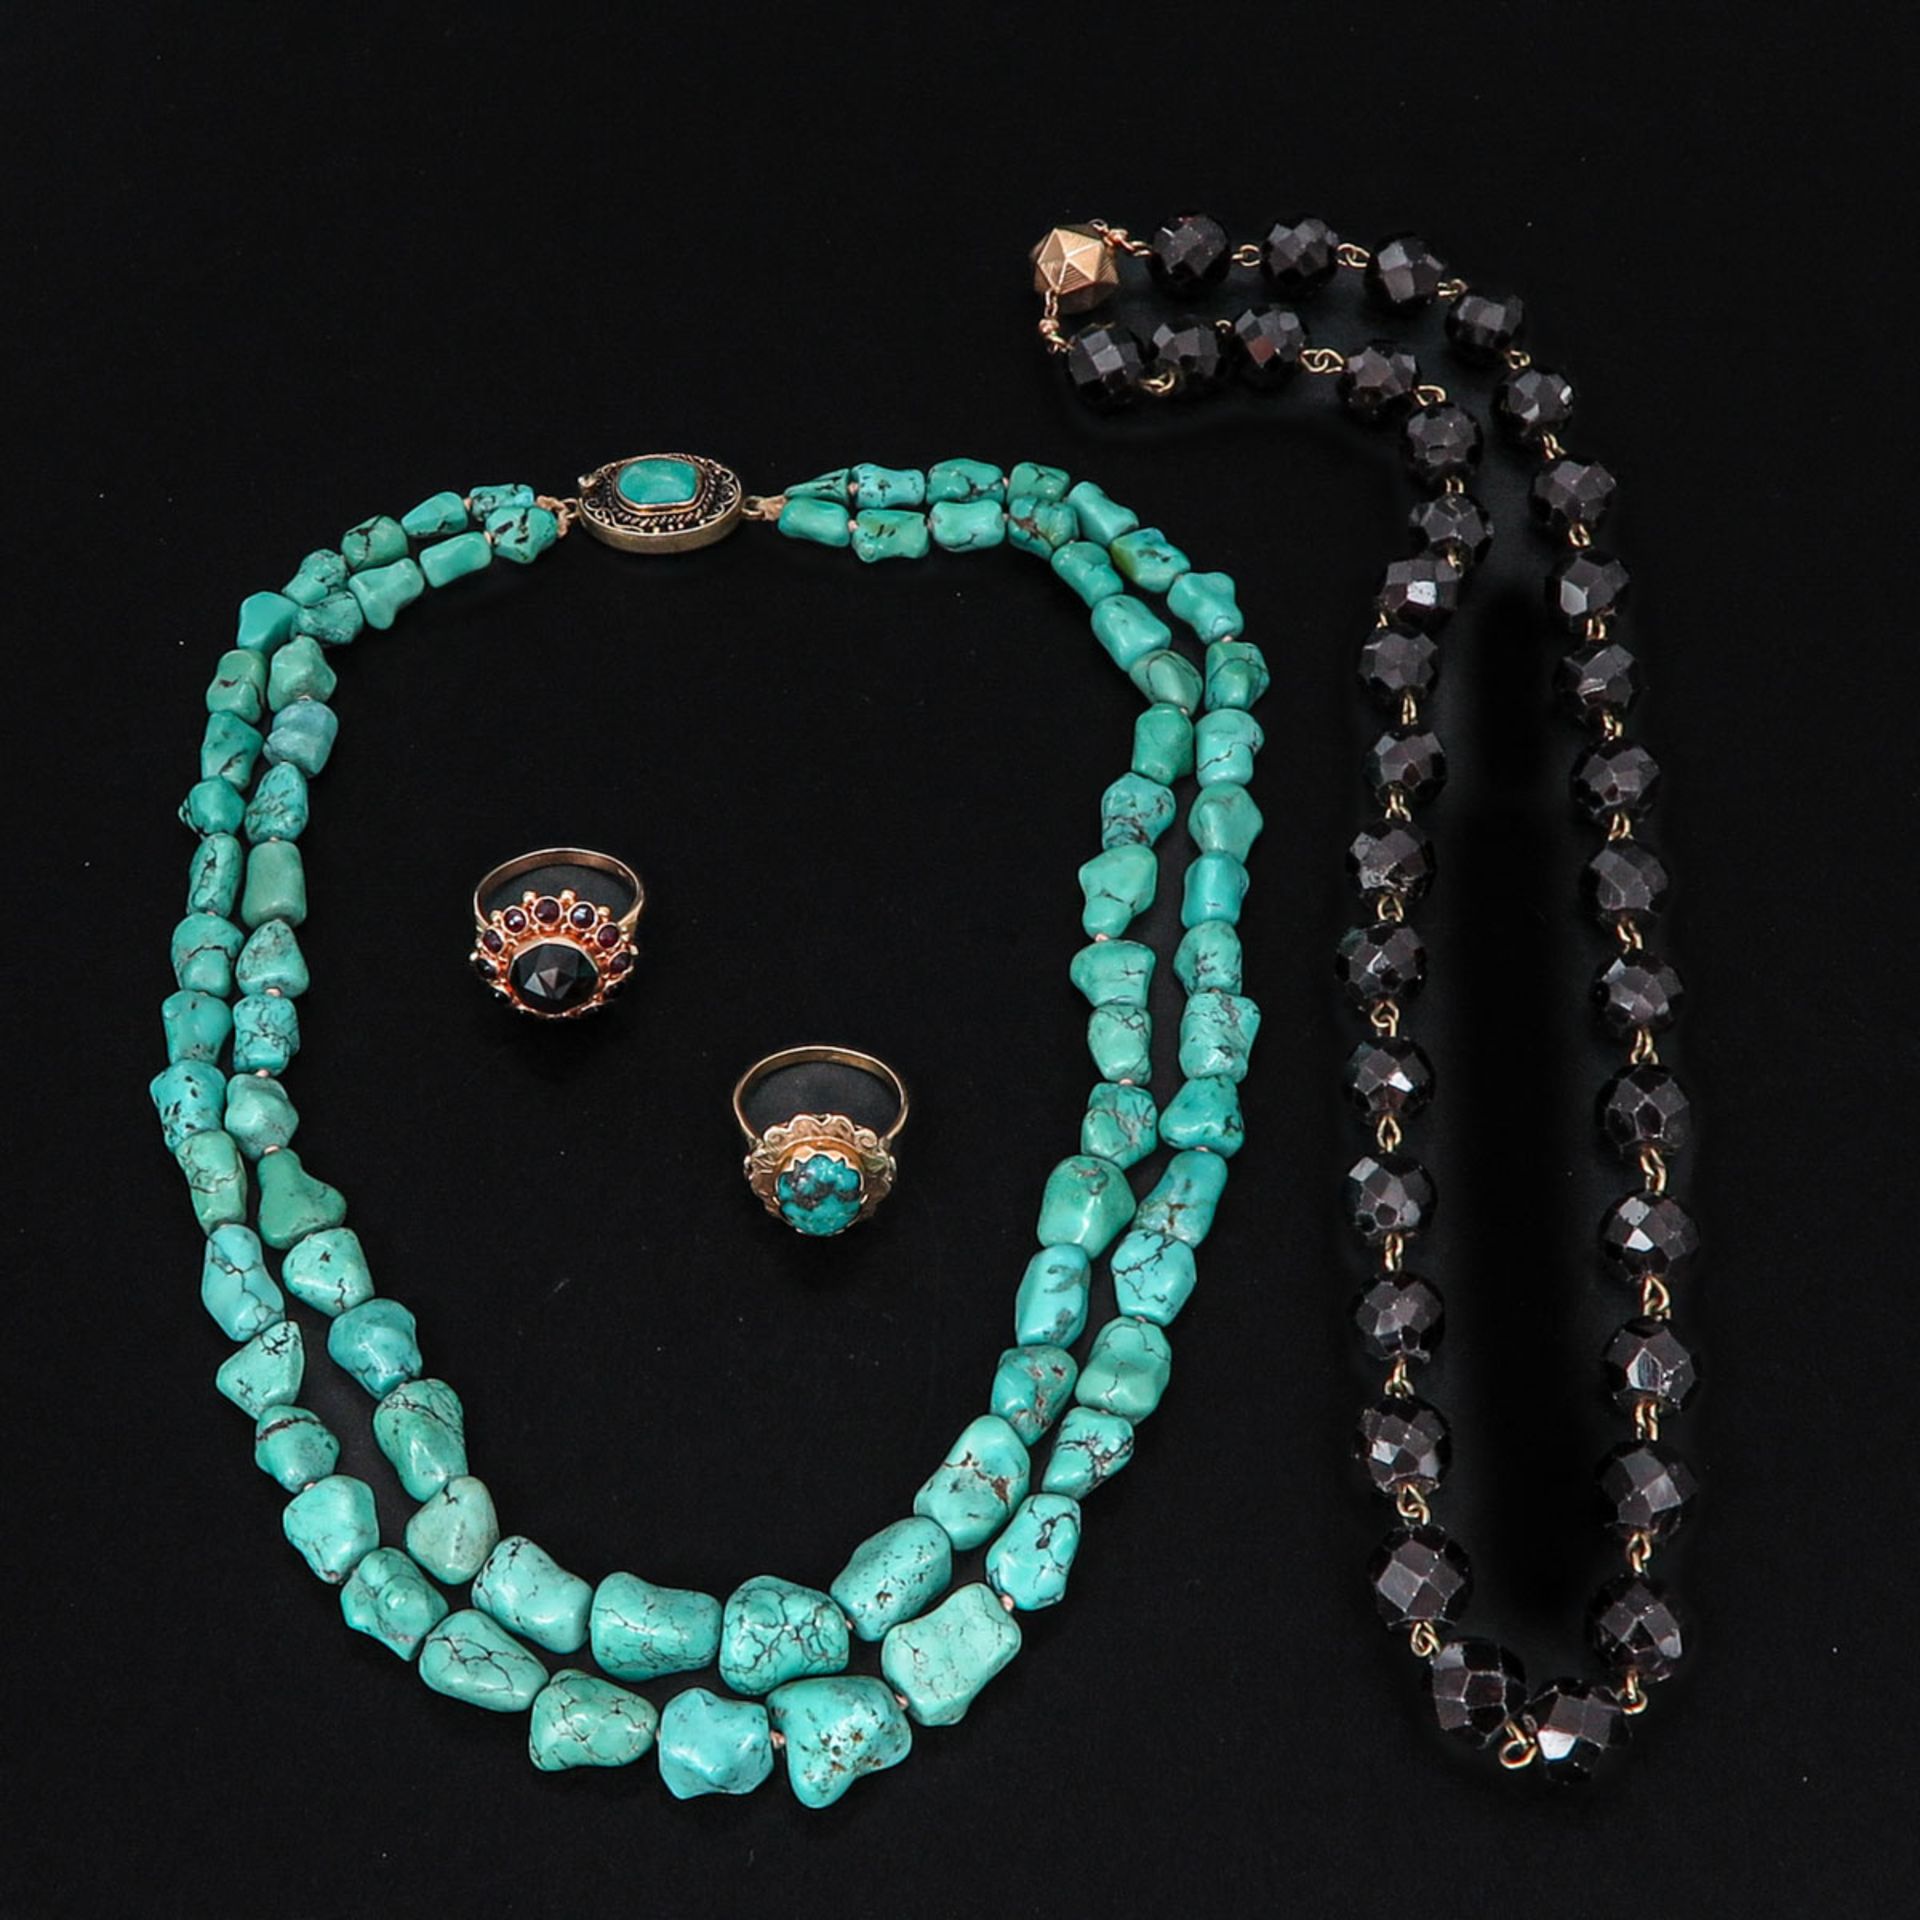 A Turquoise Necklace and Ring along with a Garnet Necklace and Ring